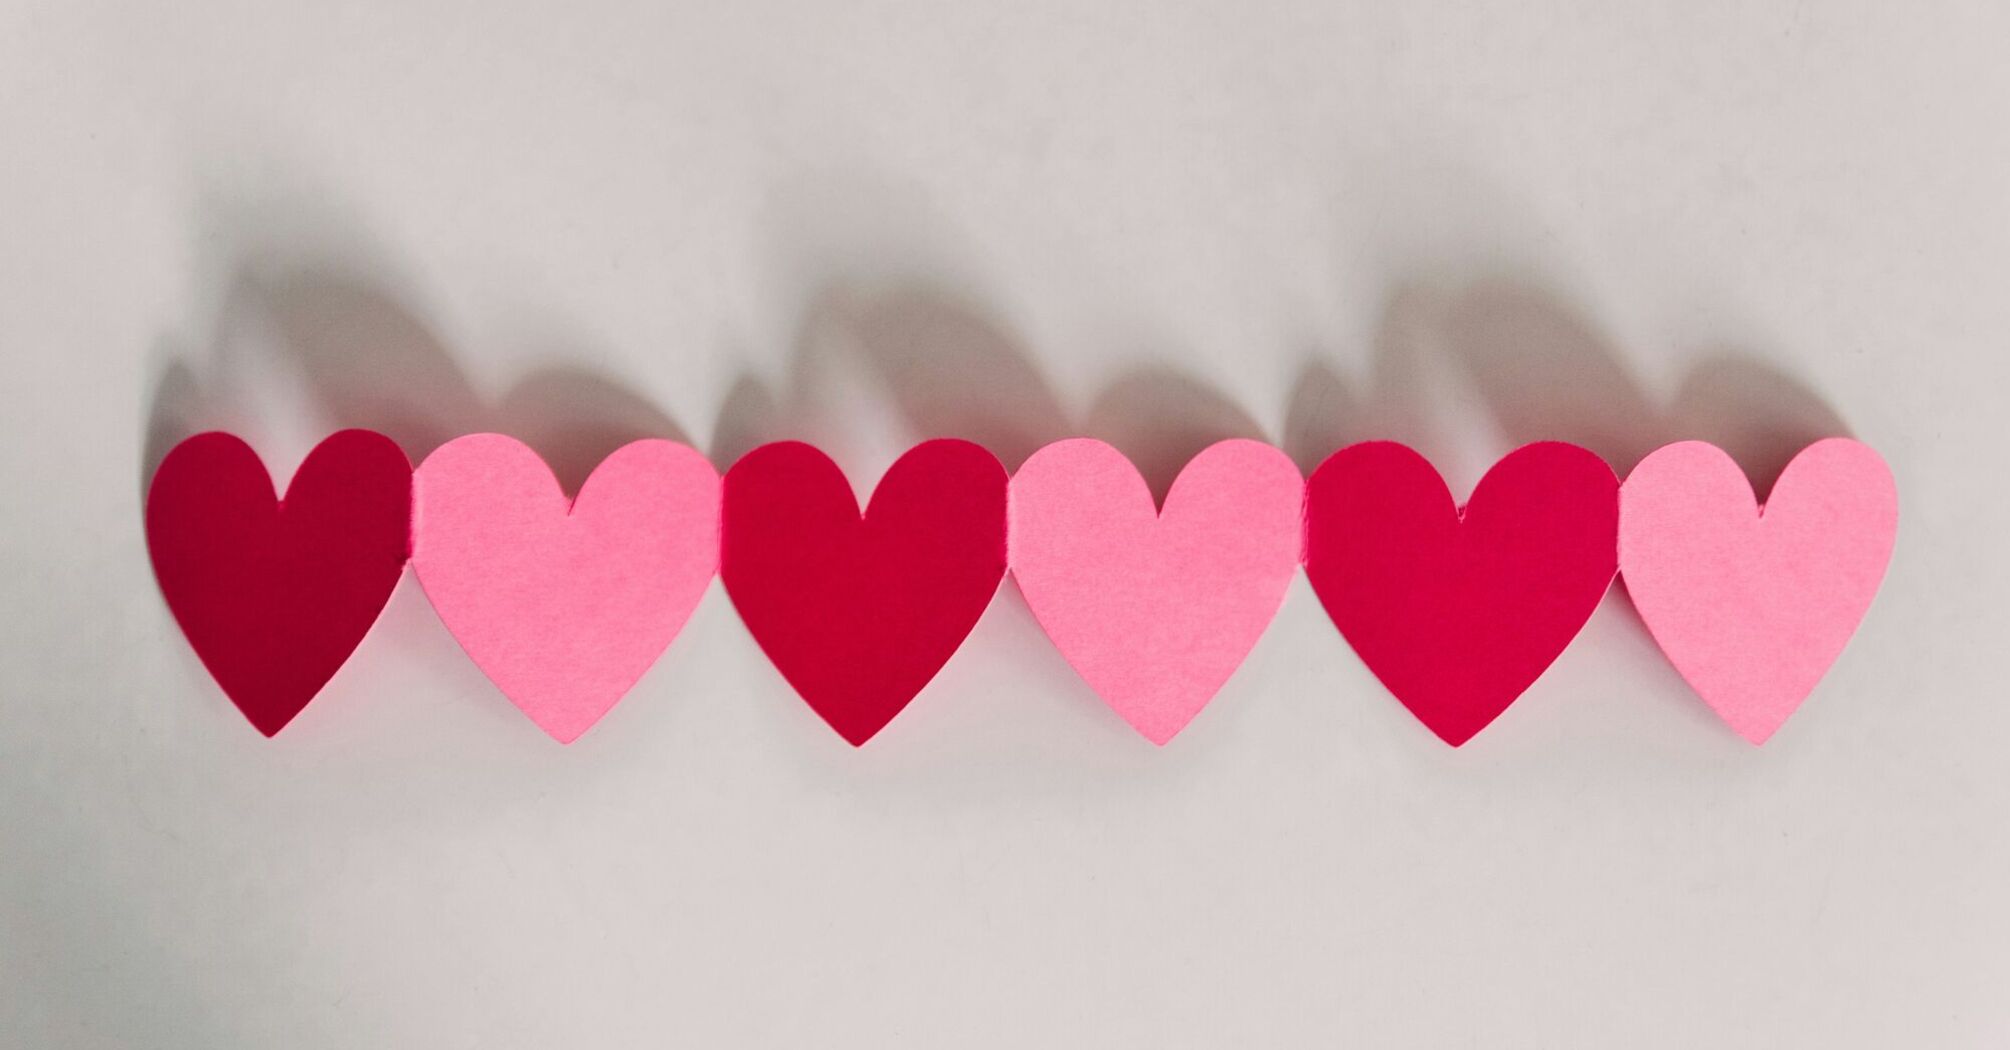 A row of cut-out paper hearts in shades of pink and red with their shadows cast on a light background